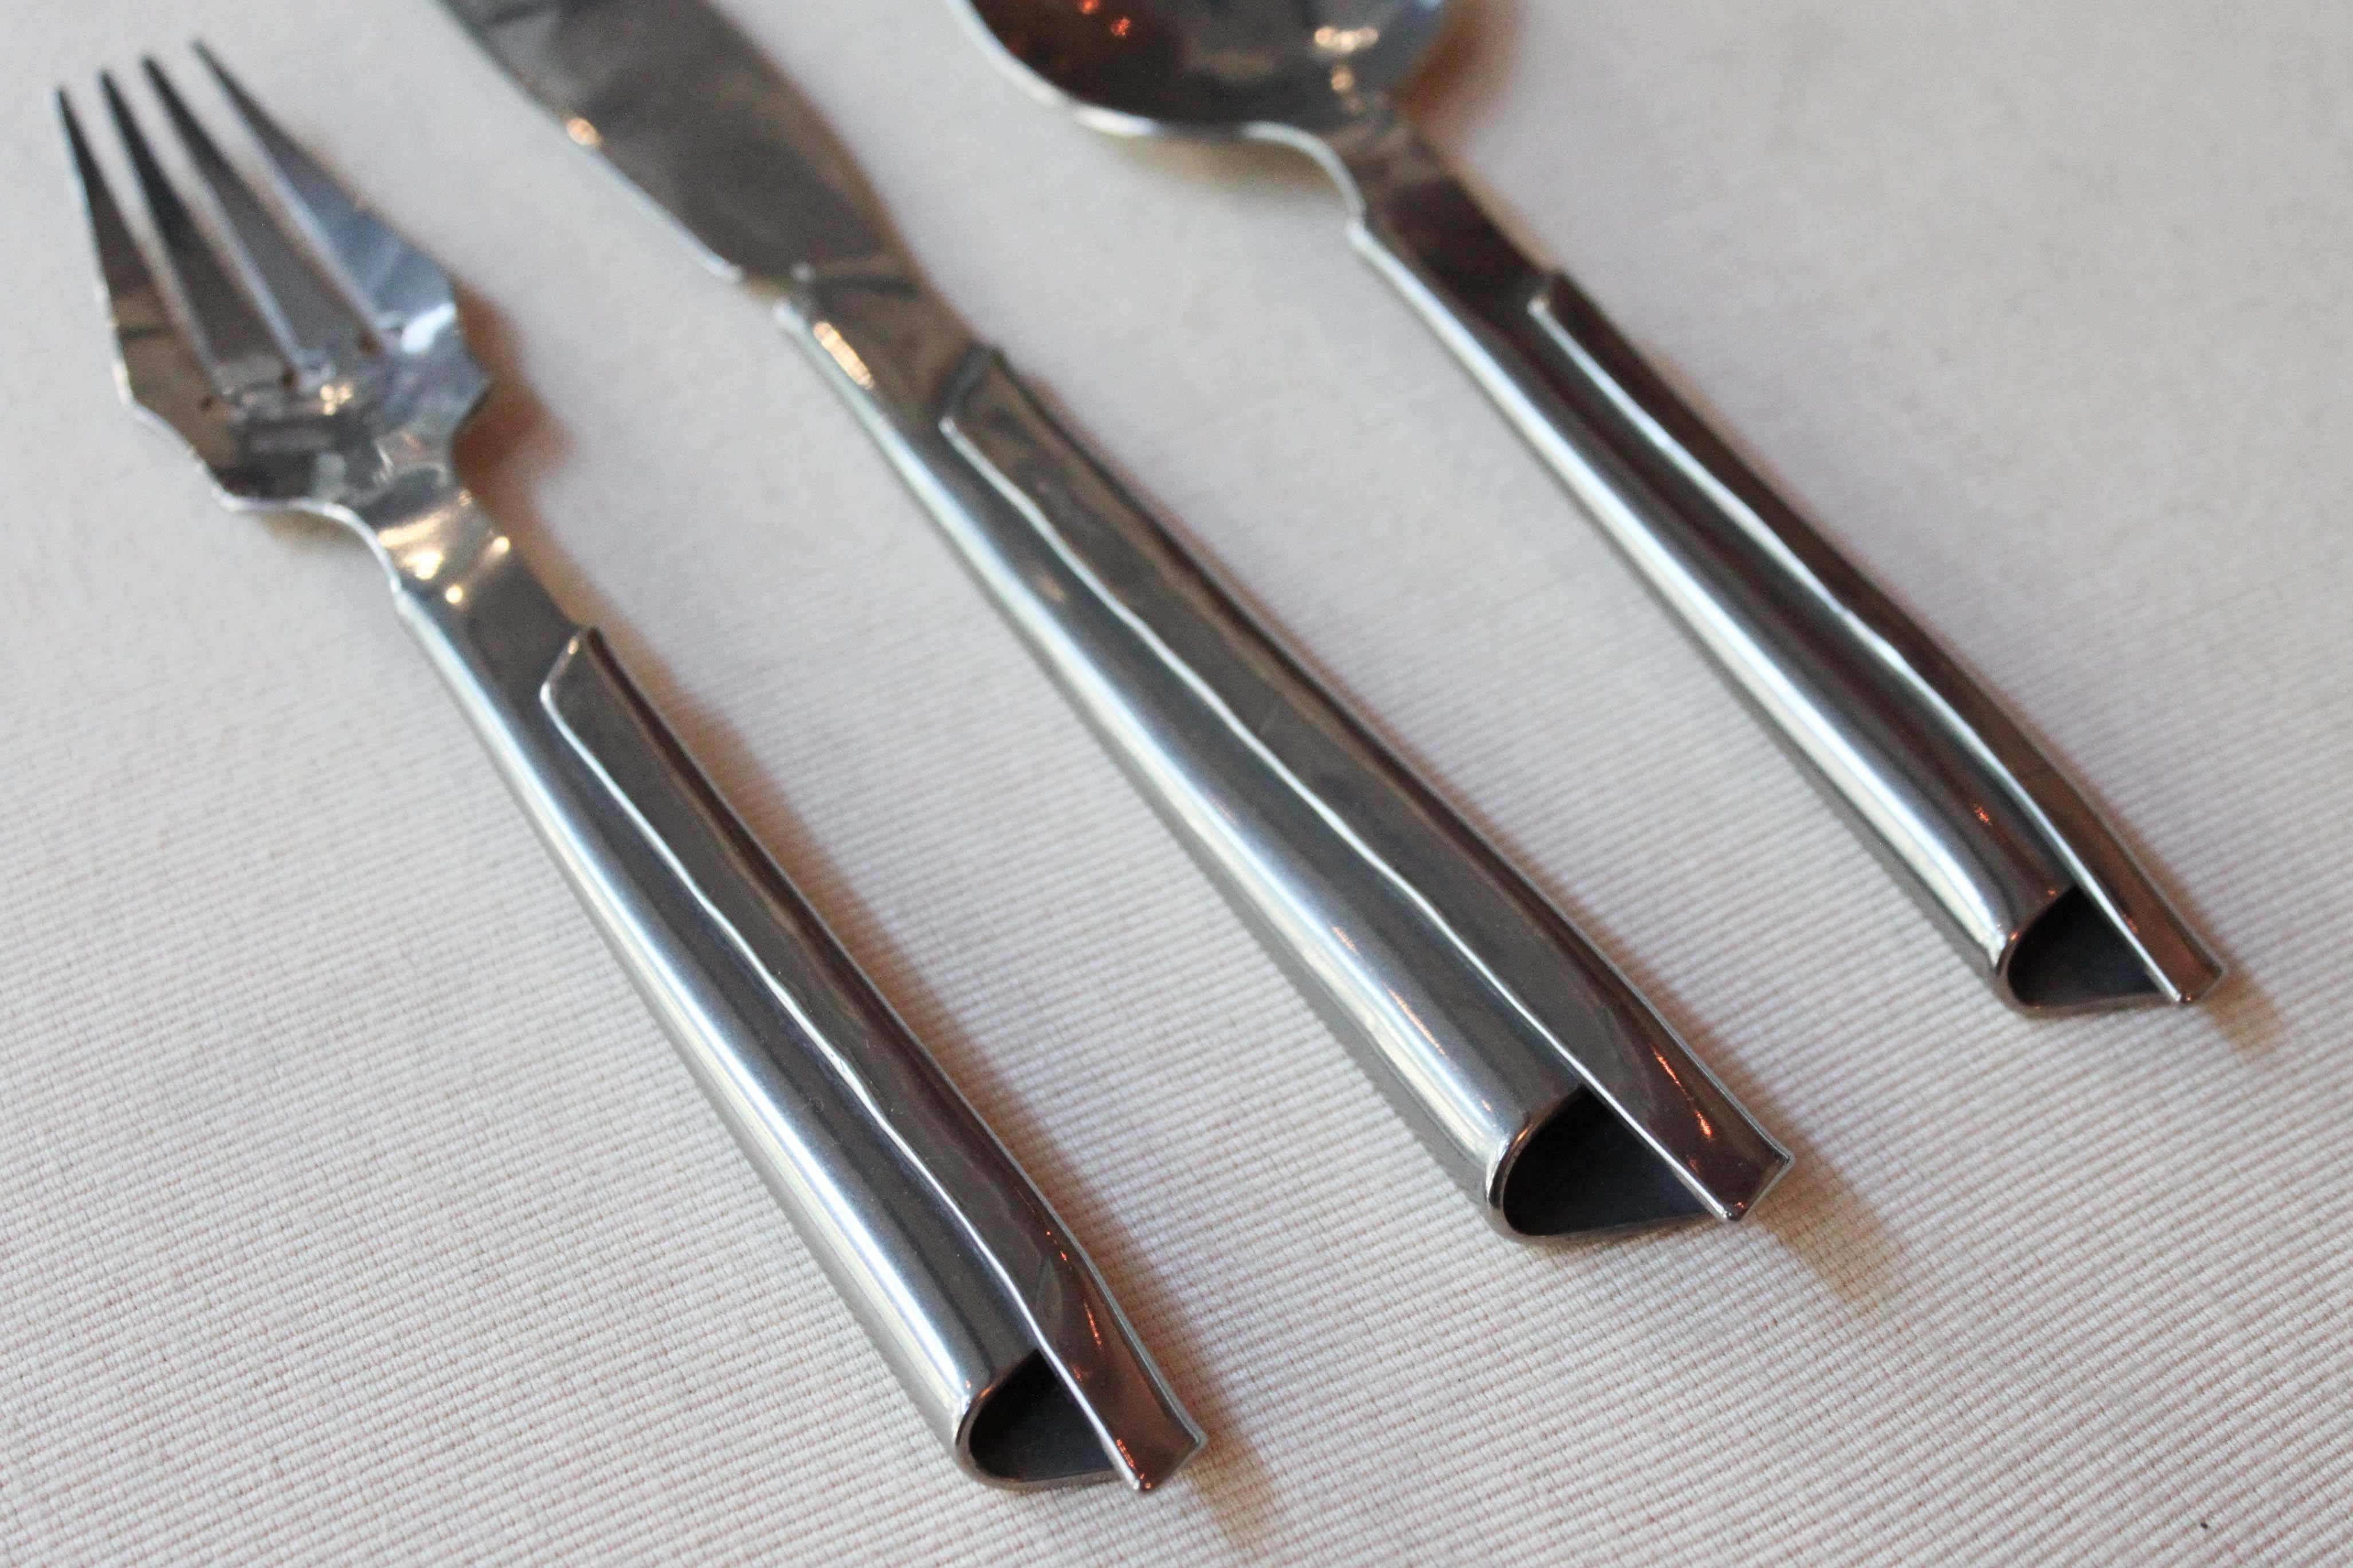 Hand-hammered stainless steel flatware by Canadian metalworker and designer Stefanie Dueck. Each set is made by the artist, formed by hand in her Vancouver studio. Sold as a set of three, multiples available. 

Measures: Fork: 7.5